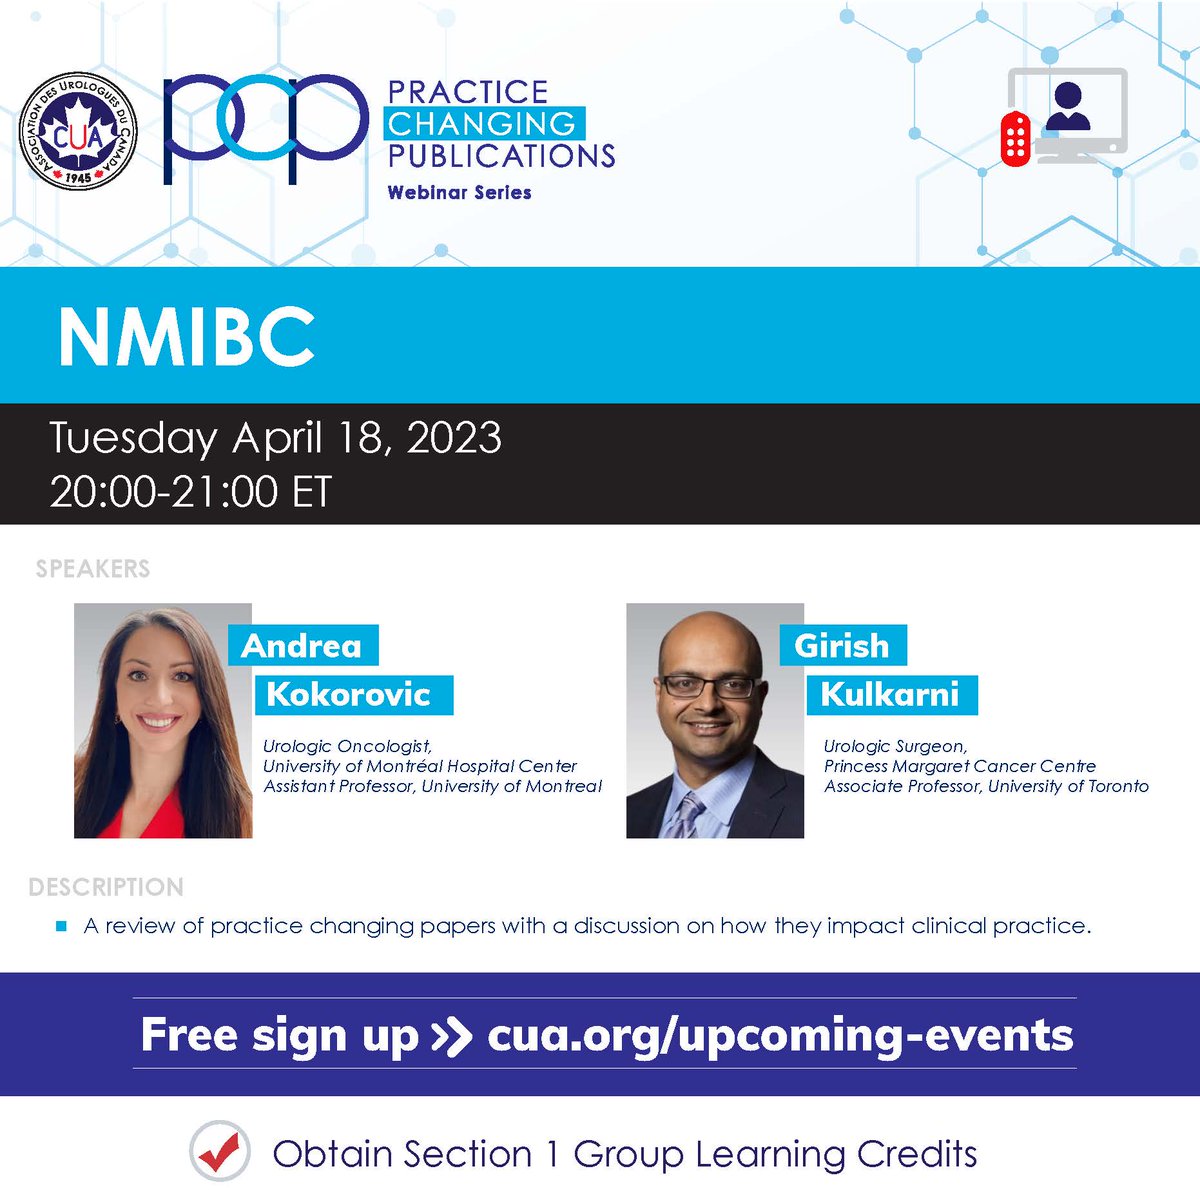 ⭐️You will not want to miss this event! #CUAPCP Practice Changing Publications (PCP) in NMIBC FREE REGISTRATION: cua.org/event/16163 #NMIBC @DrAndreaKoko @GSK_UofT @BladderCancerCA